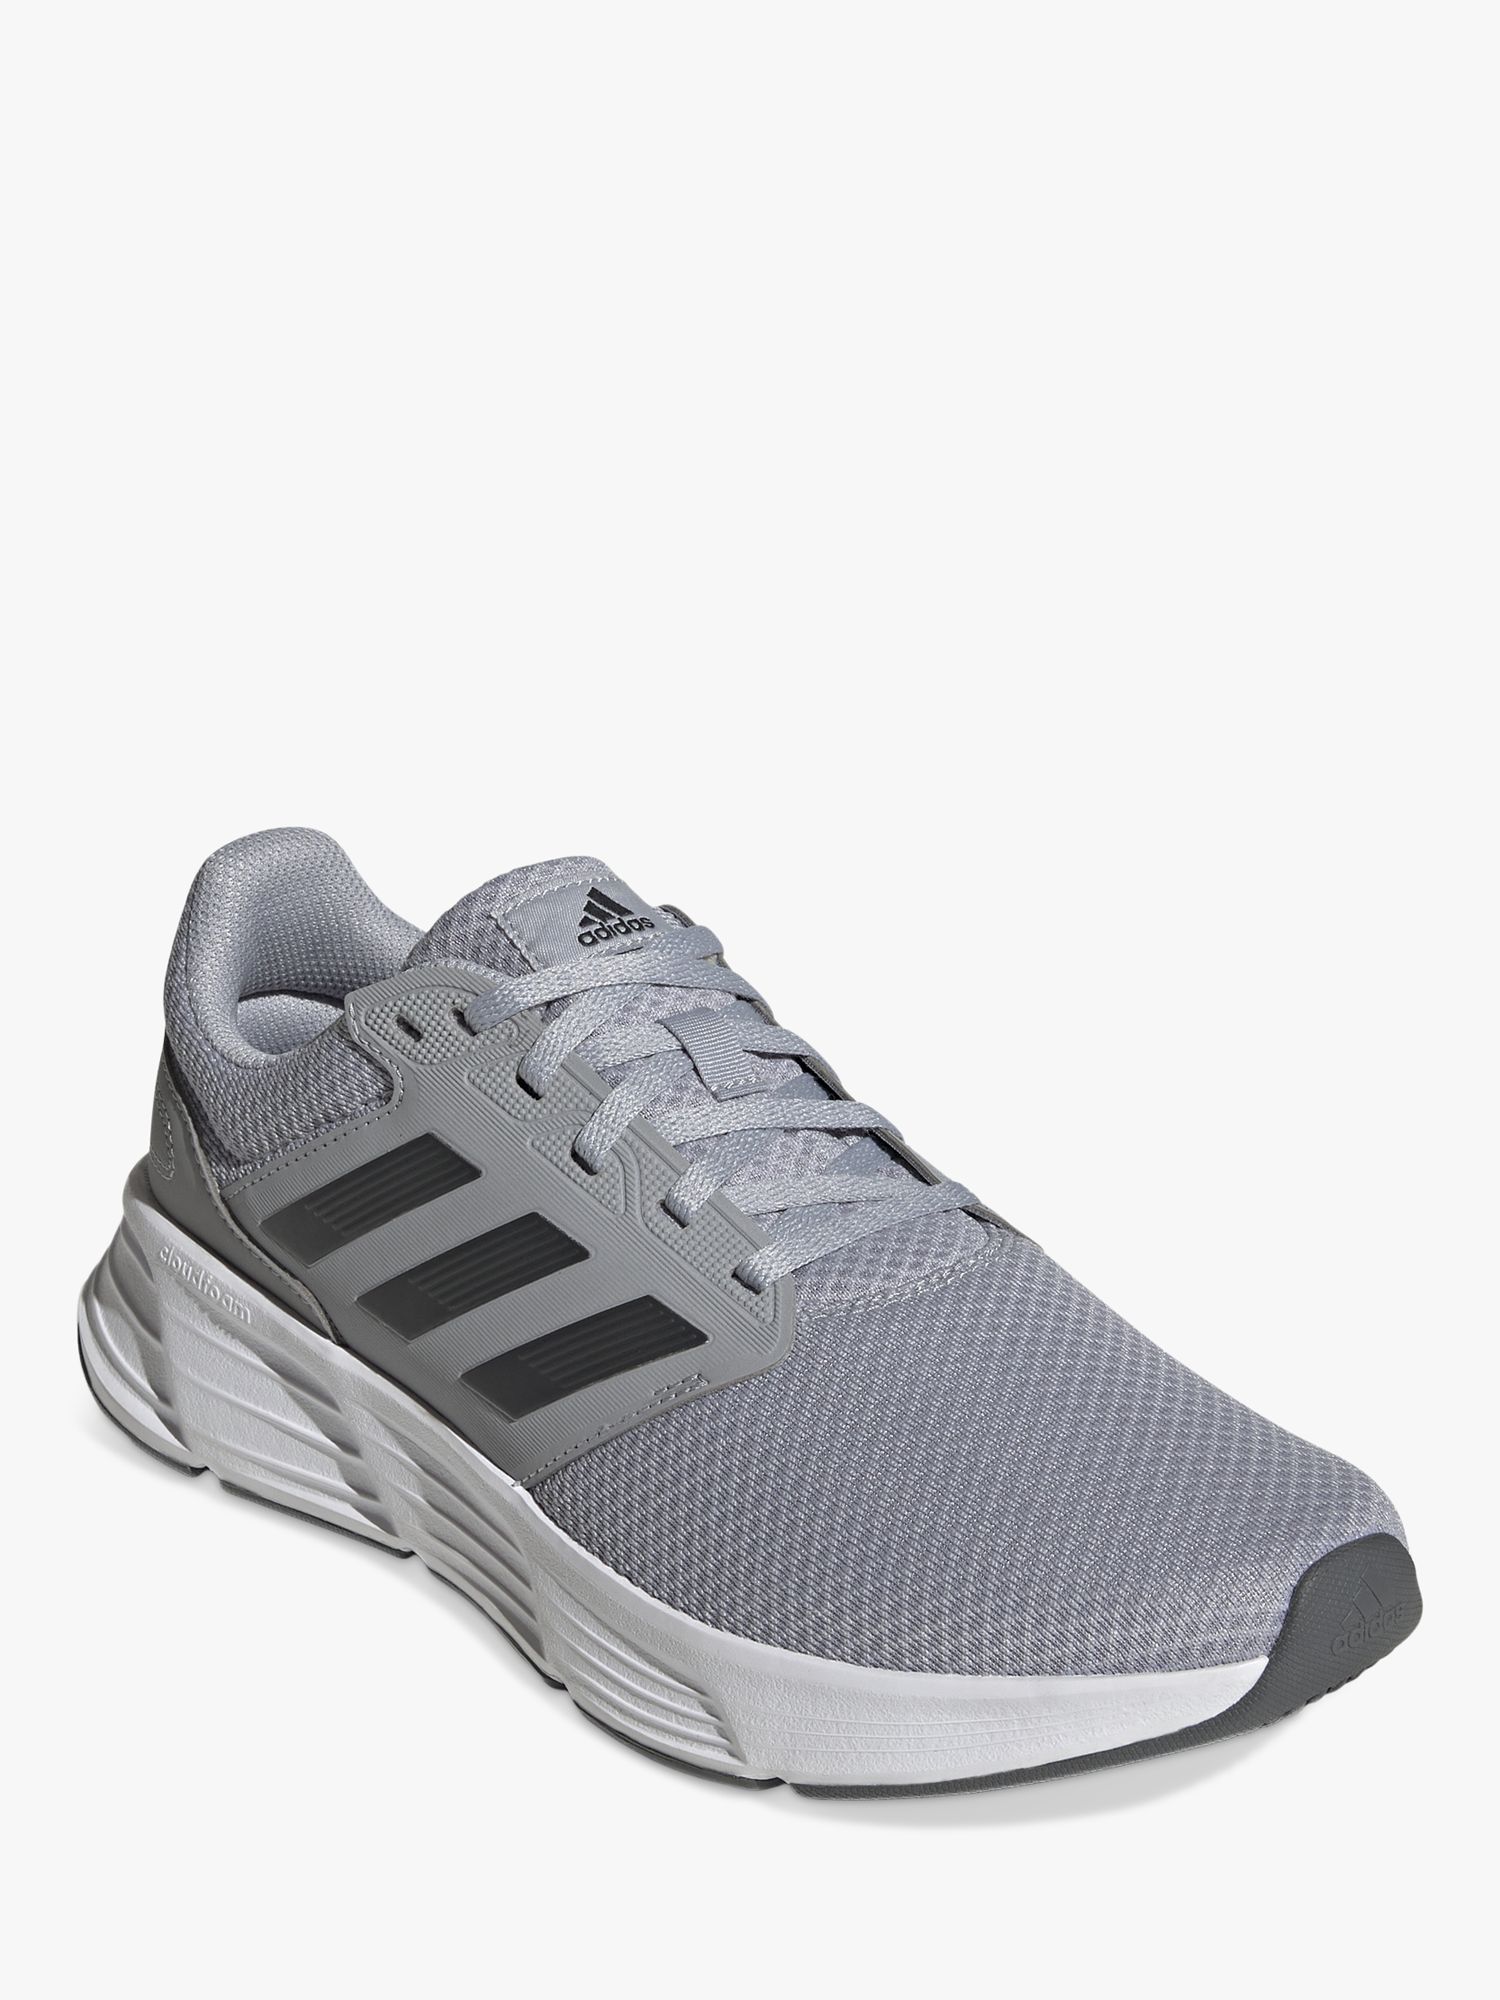 adidas Galaxy 6 Men's Running Shoes, Halo Silver/Carbon/Cloud White, 7